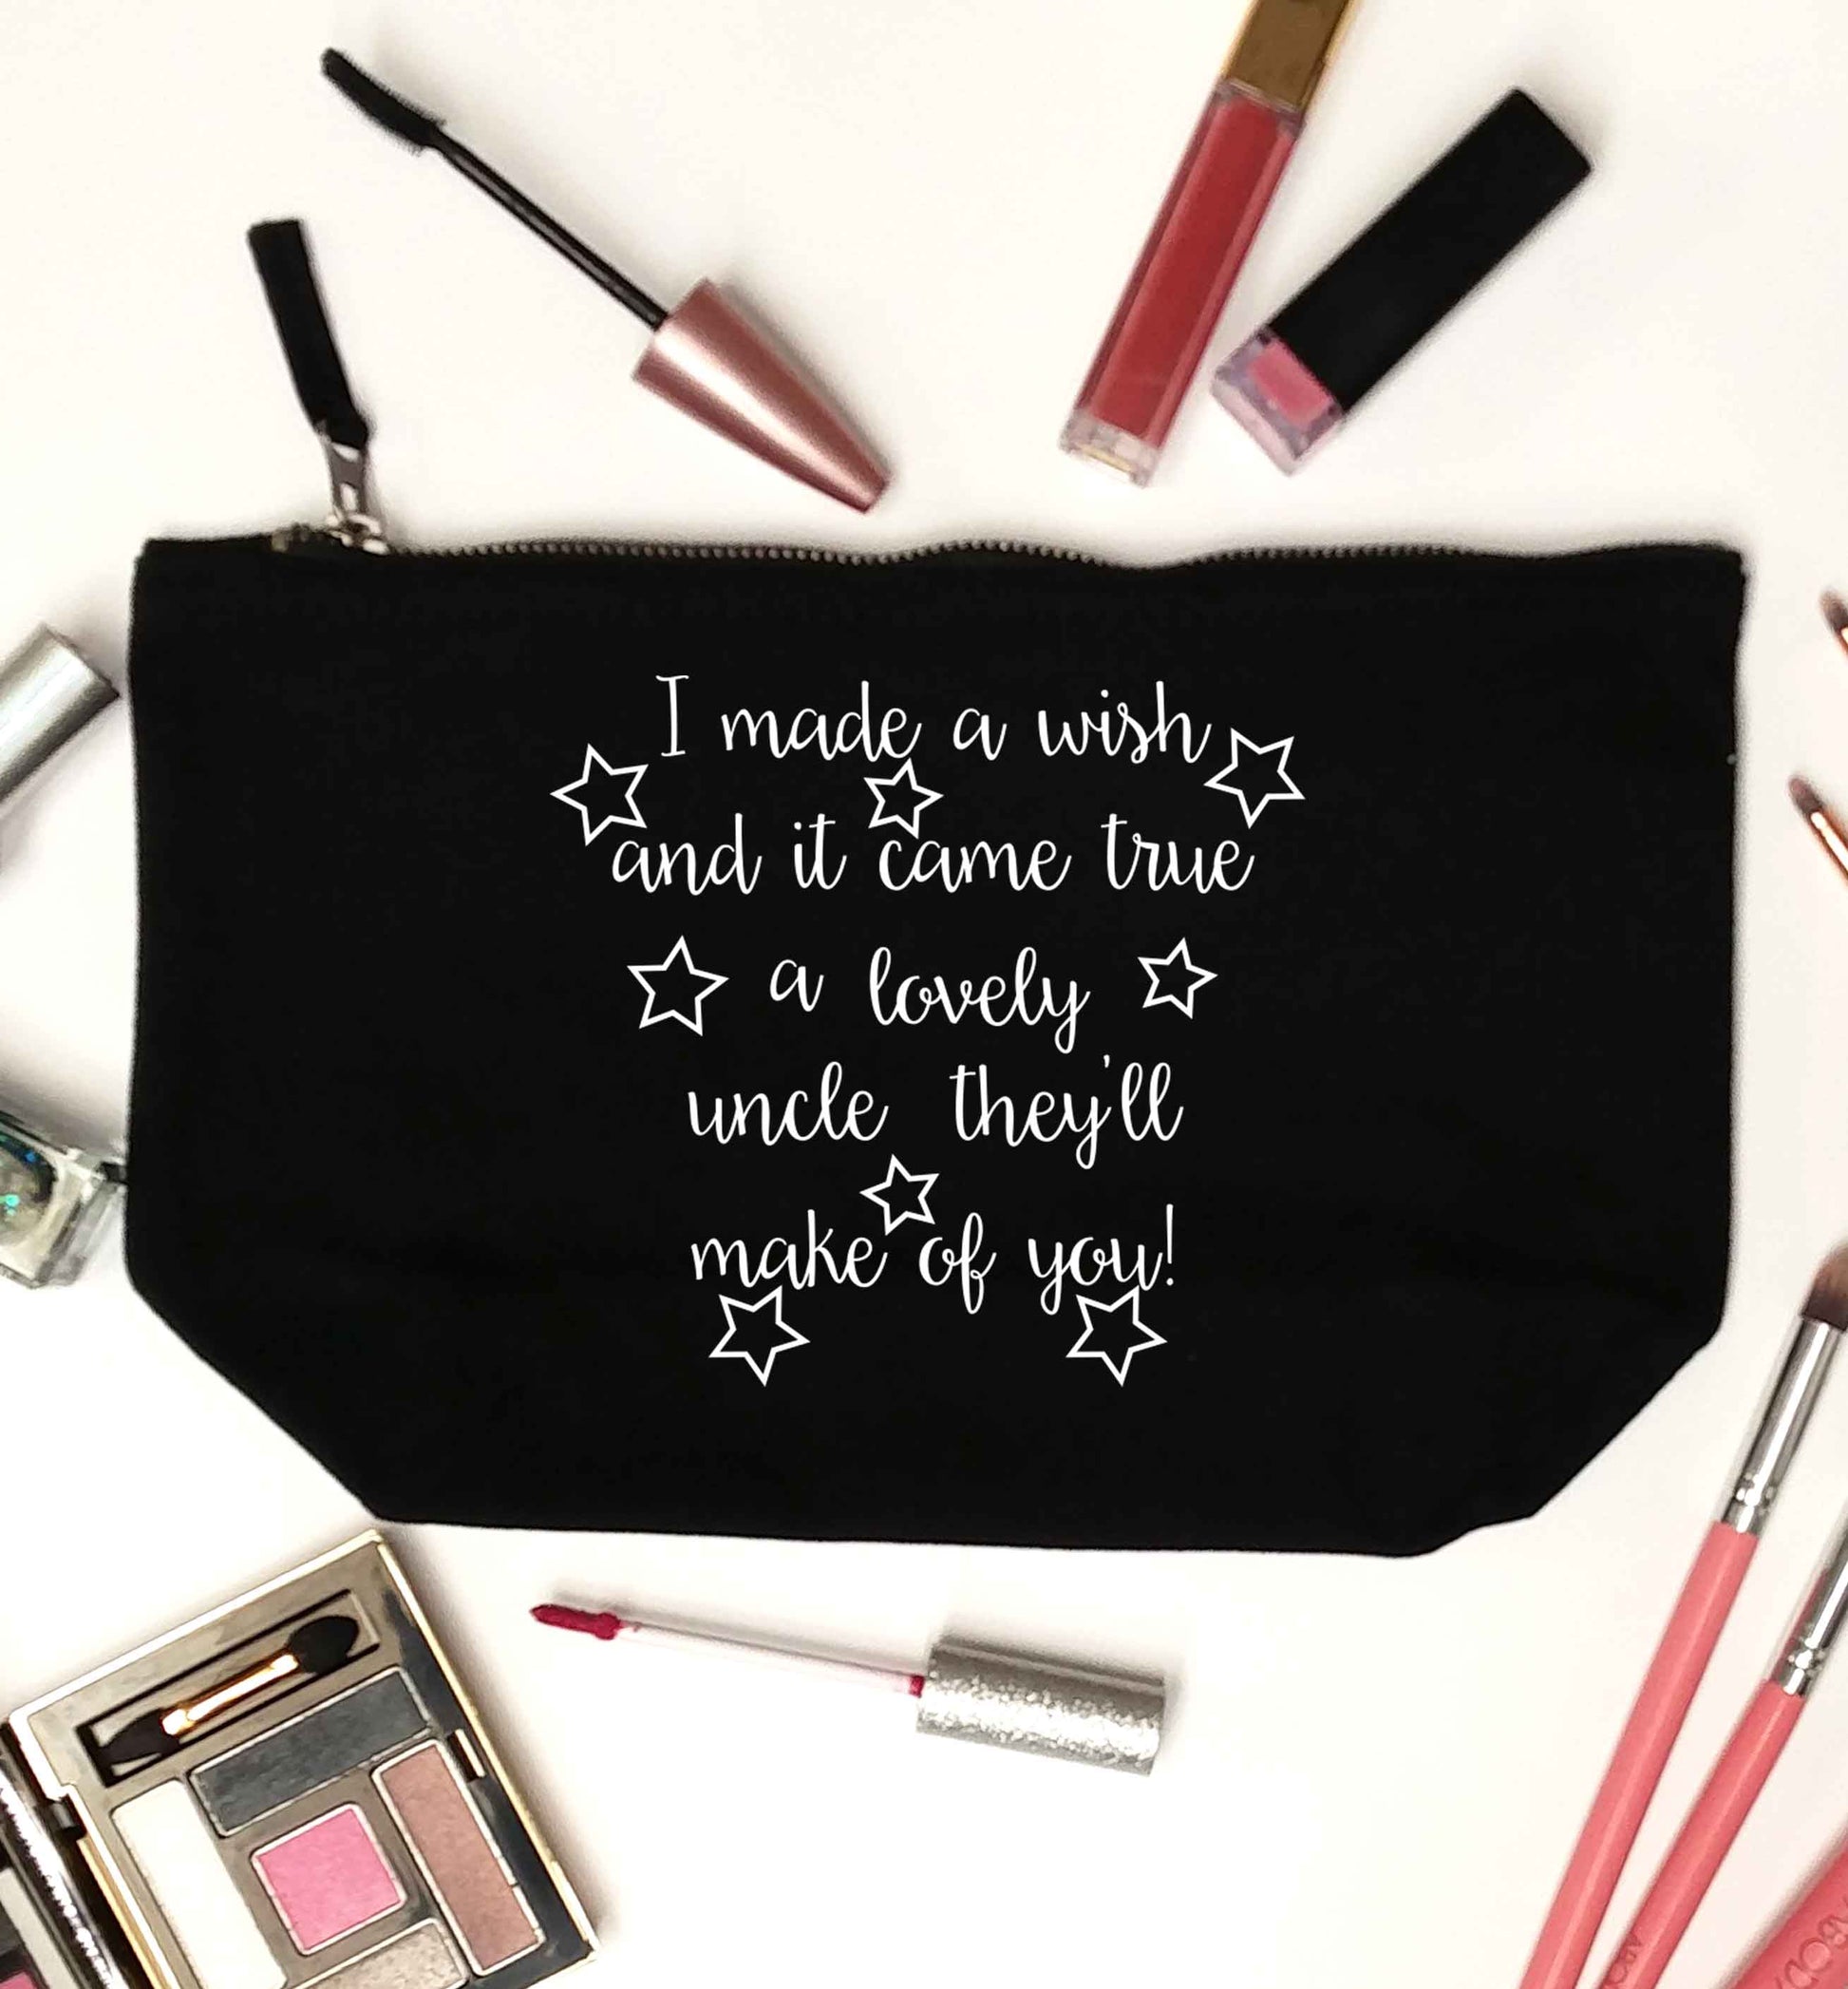 I made a wish and it came true a lovely uncle they'll make of you! black makeup bag